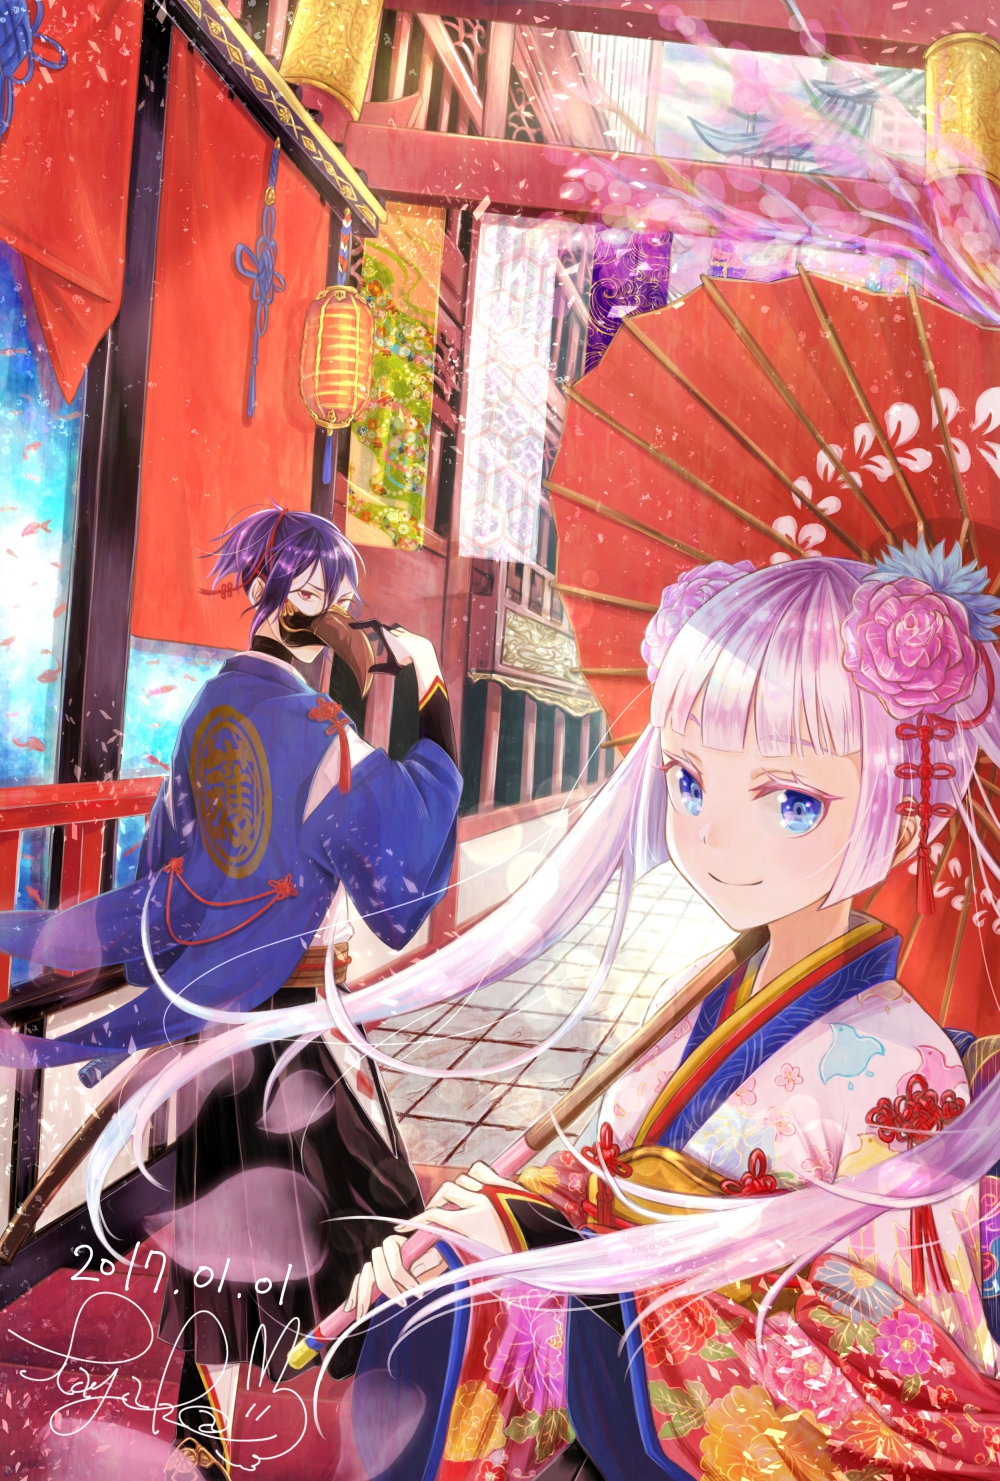 1boy 1girl architecture bangs blue_eyes blunt_bangs dated east_asian_architecture floral_print flower hair_flower hair_ornament highres lantern long_hair looking_at_viewer mask nengajou new_year original outdoors over_shoulder paper_lantern para_sitism parasol purple_hair red_eyes smile twintails umbrella white_hair